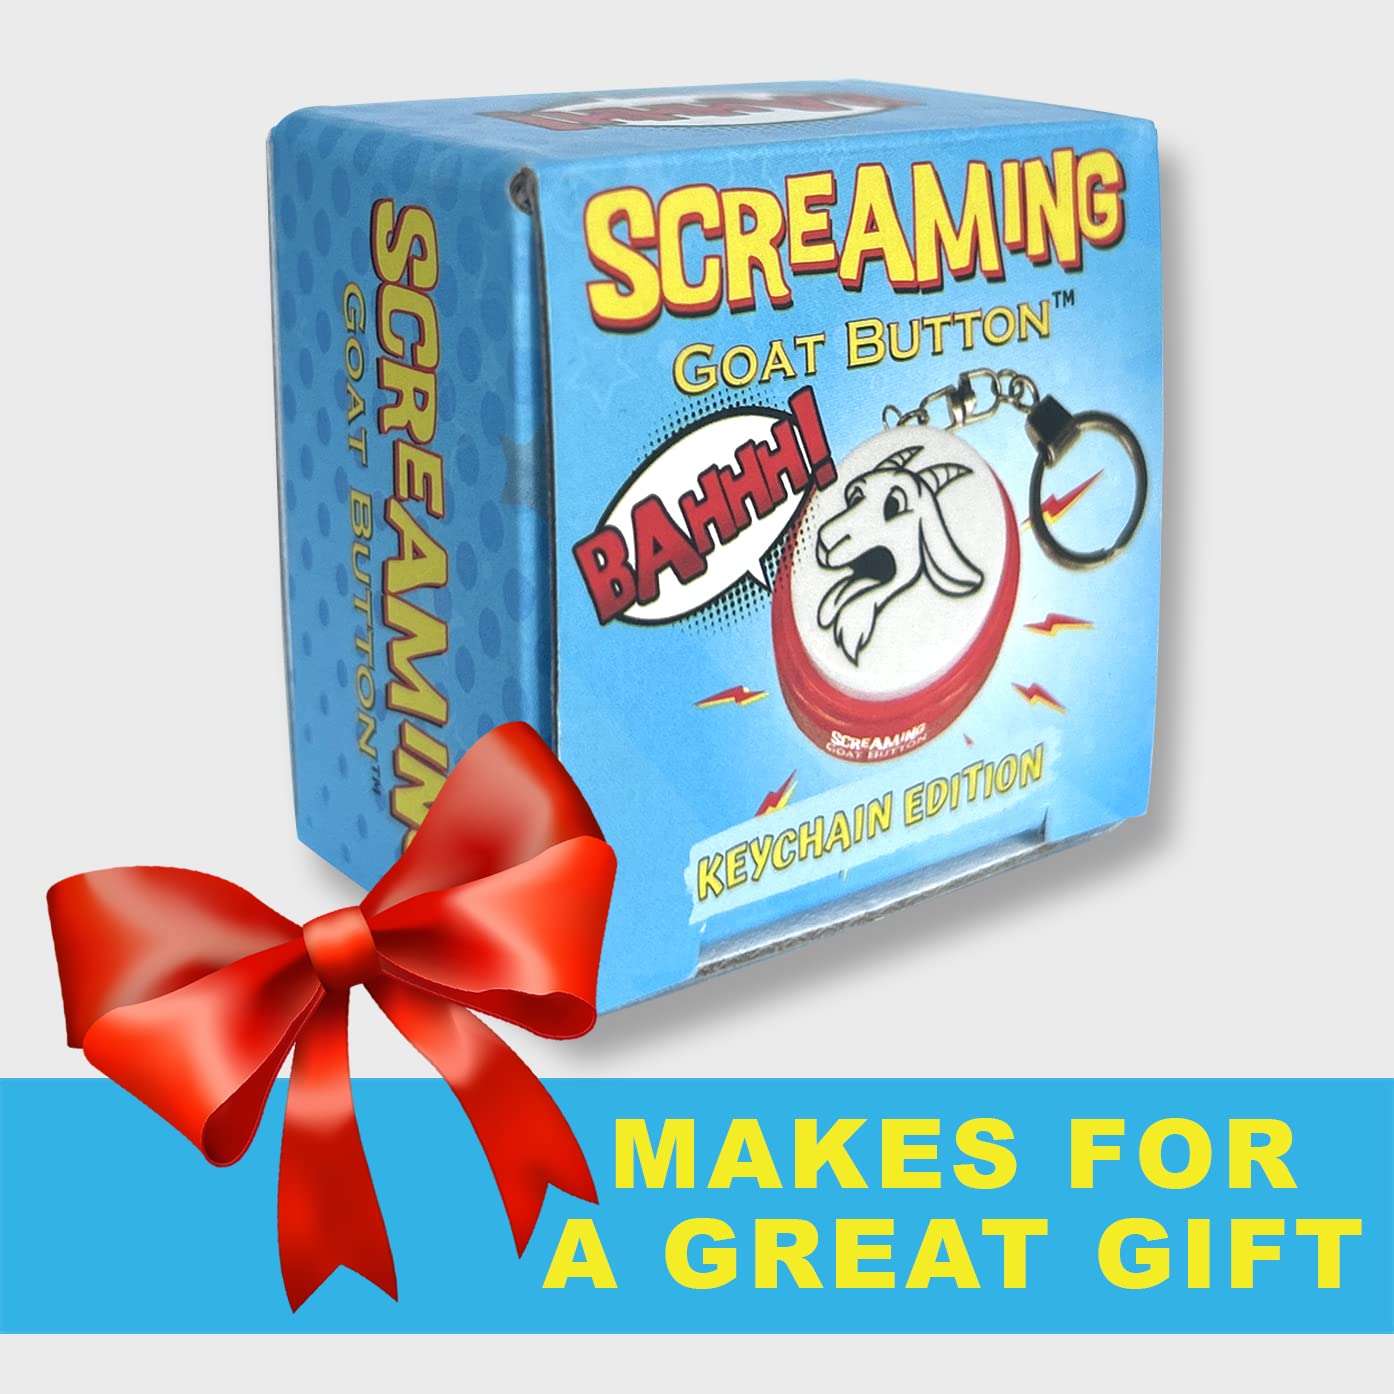 Screaming Goat Keychain Button | Gag Gifts for Men and Women | Screaming Goat Desk Toy Talking Button with a Funny Goat Scream | The Original Goat Scream, Red, Small